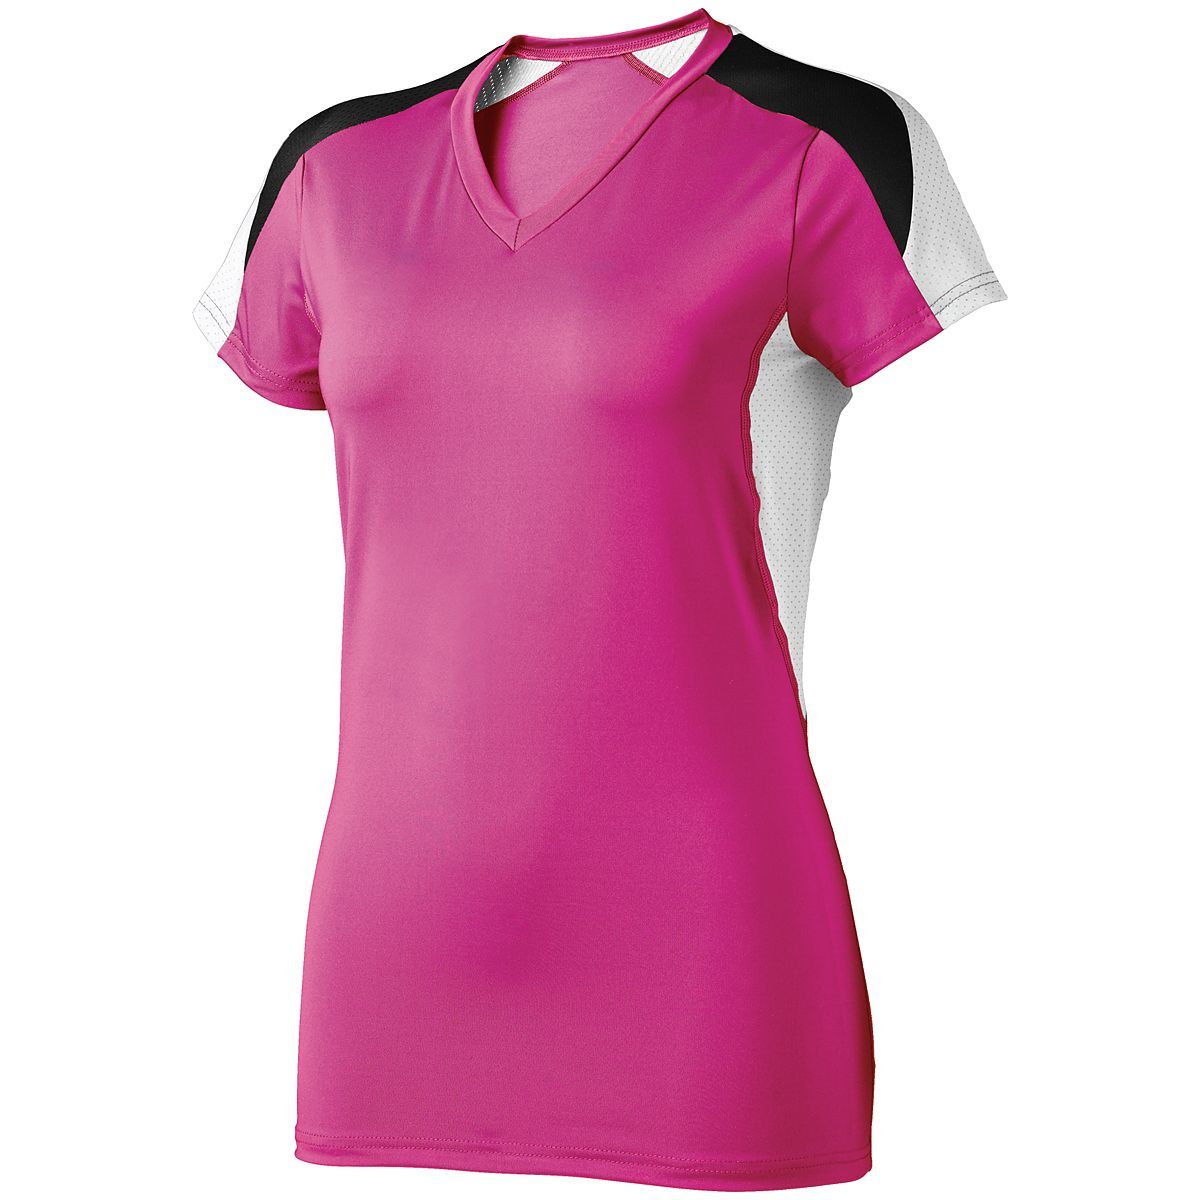 GIRLS ATOMIC JERSEY from High 5